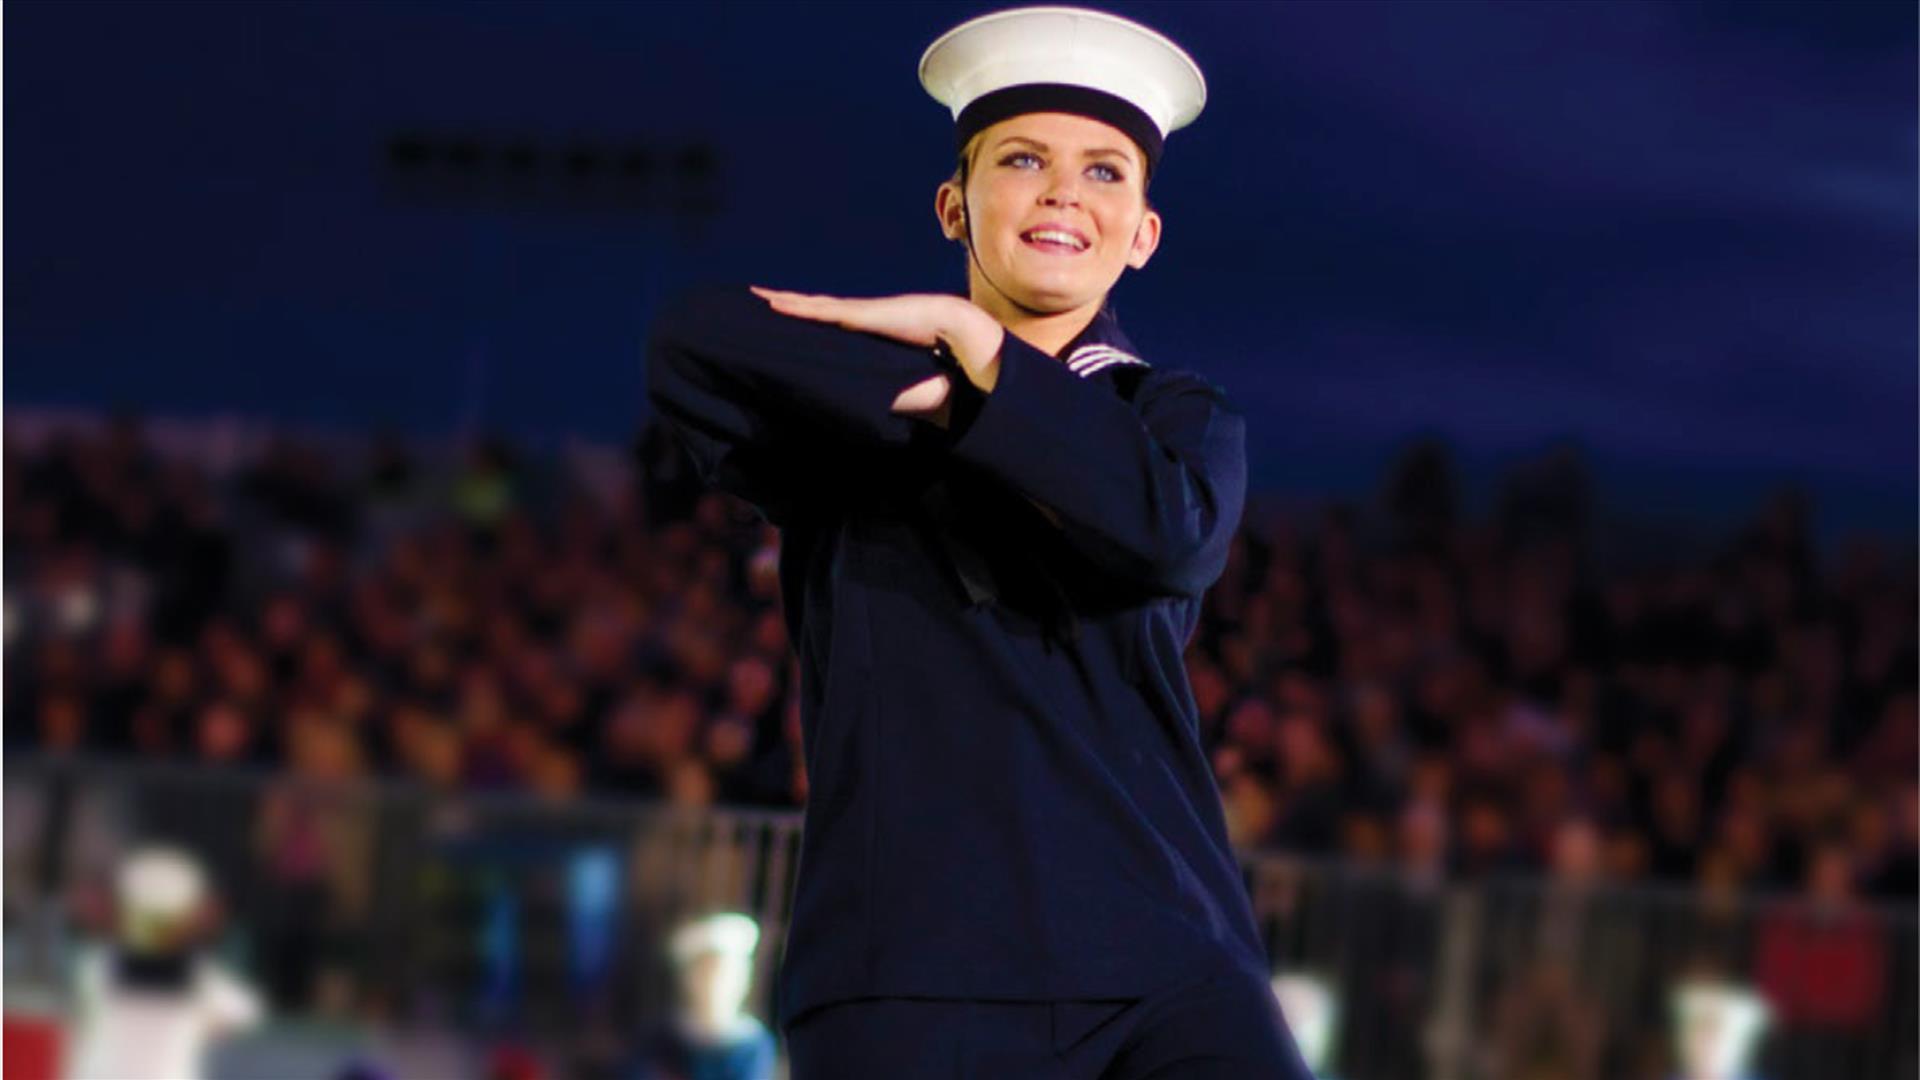 Performer dressed as a sailor